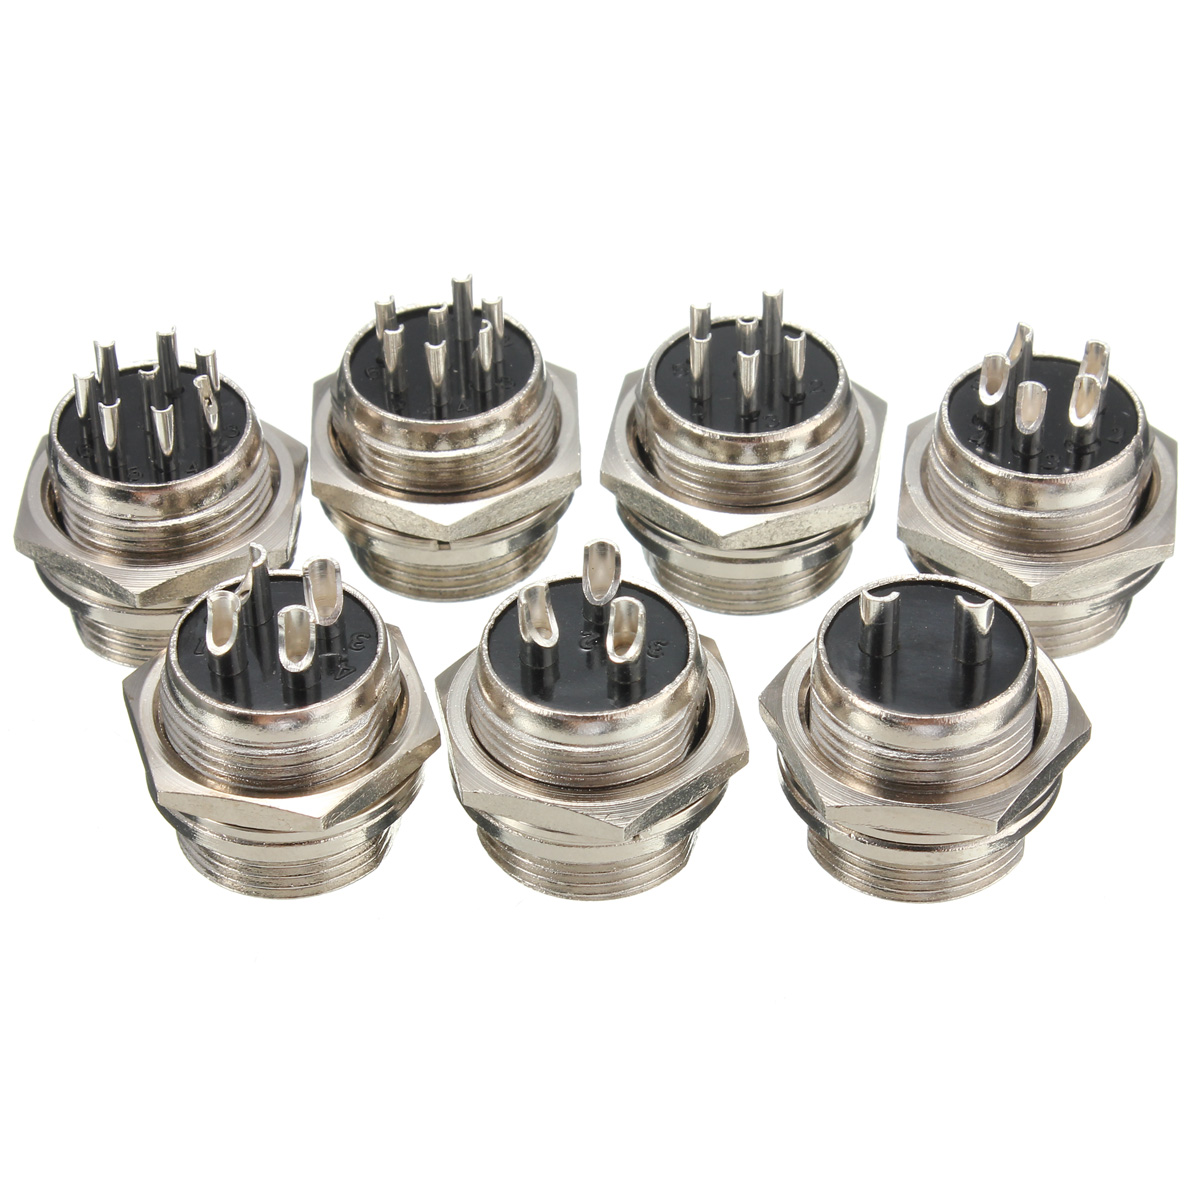 M16-2345678-Pin-Screw-Type-Electrical-Aviation-Plug-Socket-Connector-Aviation-Connector-Plug-1333374-3